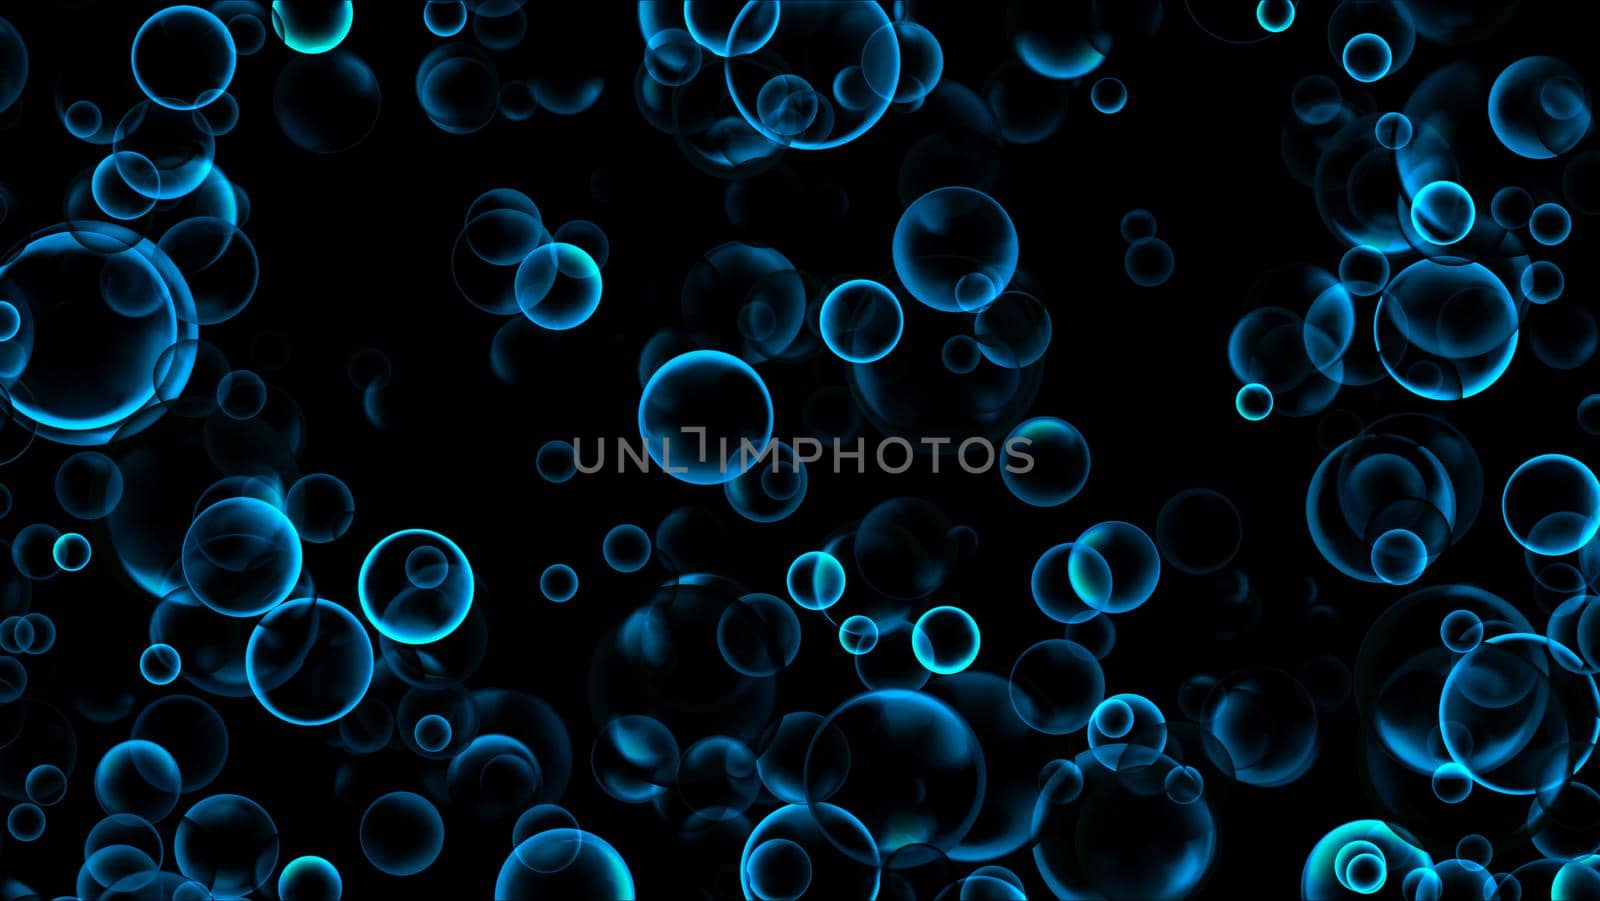 abstract blue aqua glow many size of hundred bubbles floating on the top water surface